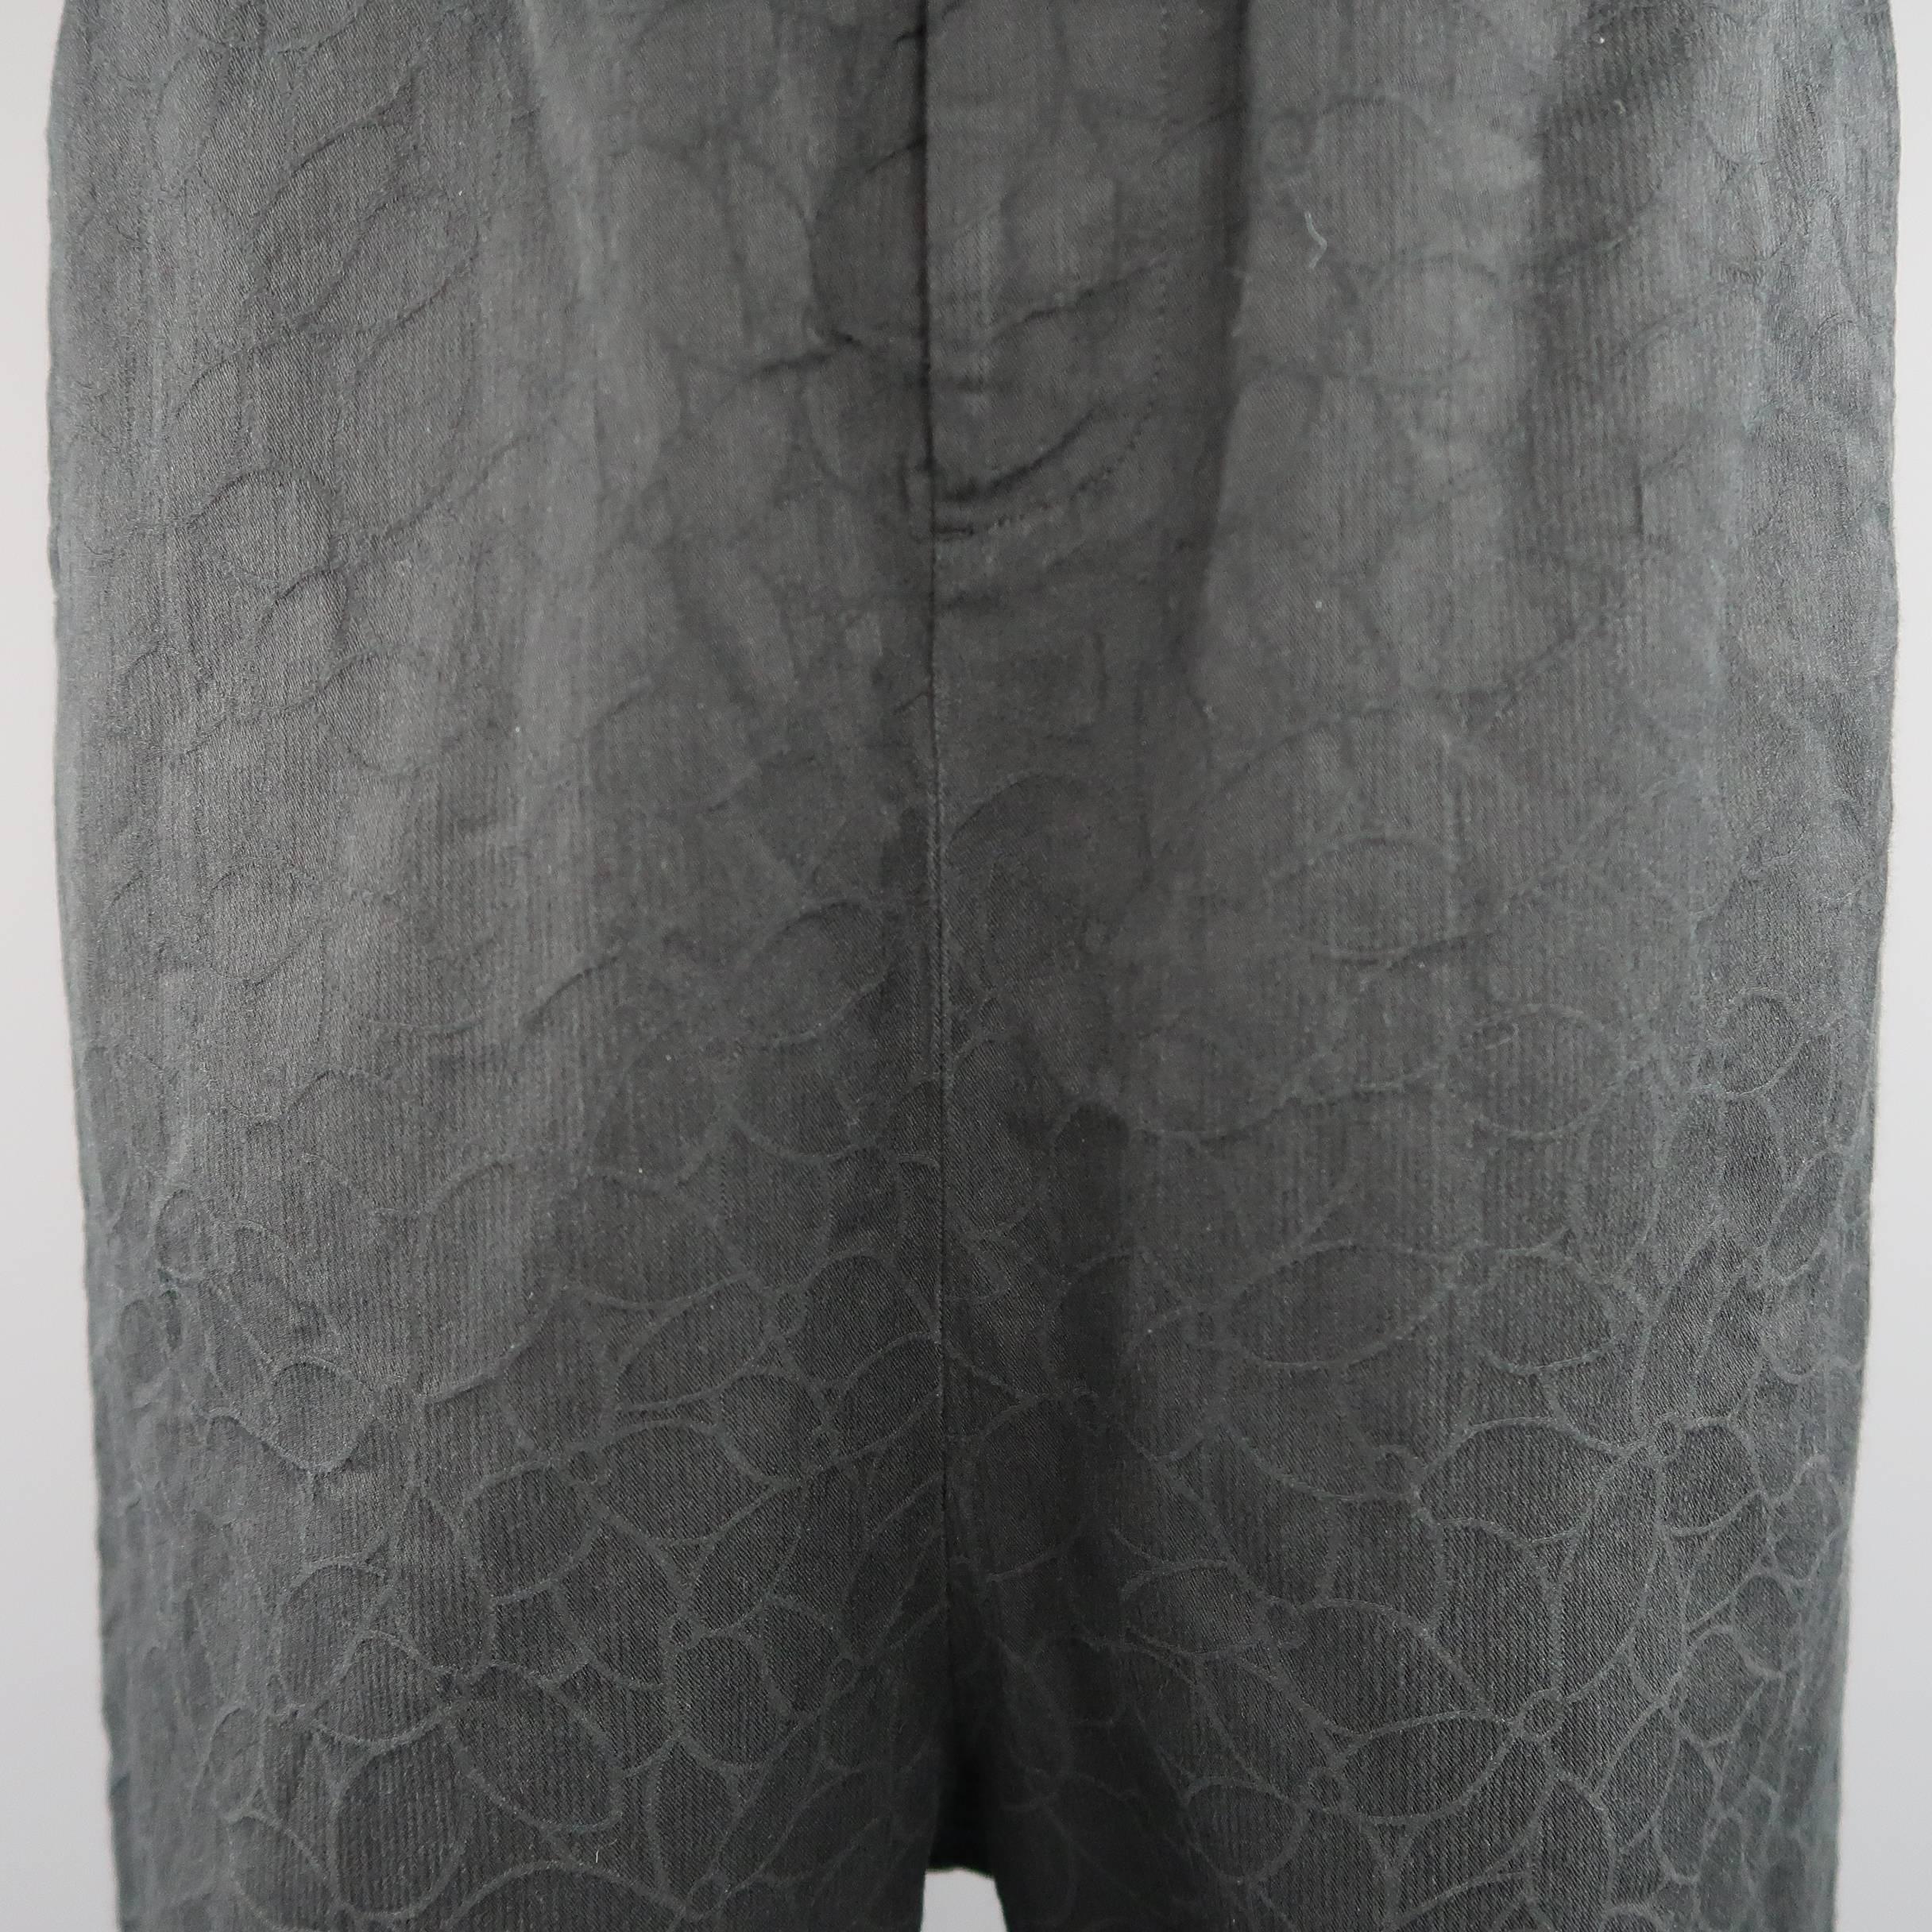 BLACK COMME des GARCONS cropped trousers come in a floral print textured cotton blend fabric and feature an elastic drawstring waistband and drop crotch silhouette. Made in Japan.
 
Excellent Pre-Owned Condition.
Marked: XXS AD 2012
 
Measurements:
